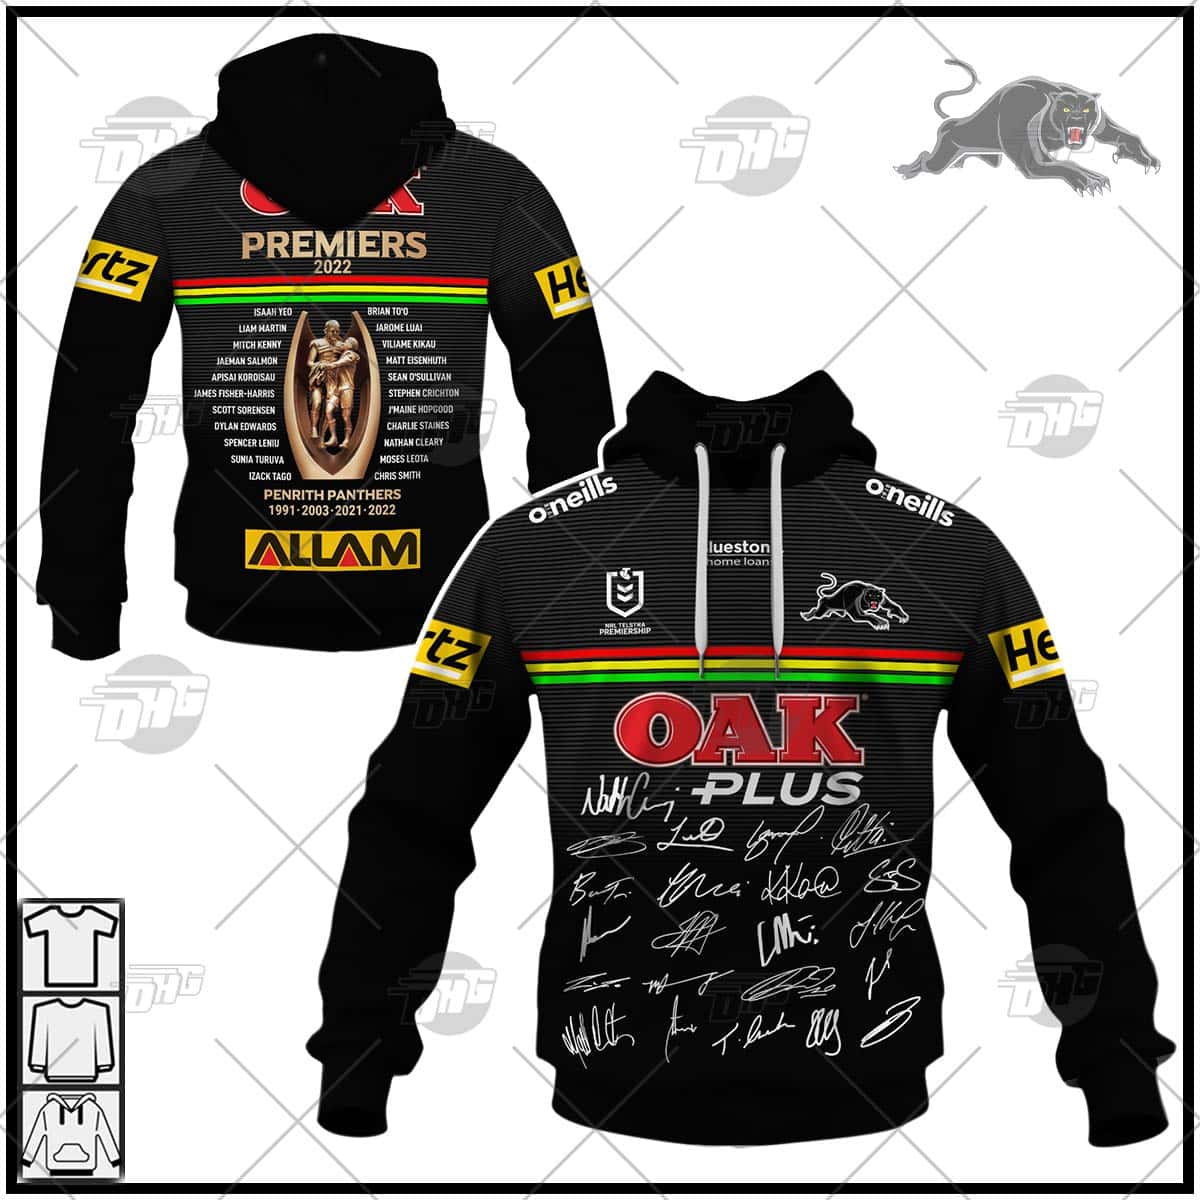 PENRITH PANTHERS 2022 BACK TO BACK PREMIERS TEAM SIGNED JERSEY